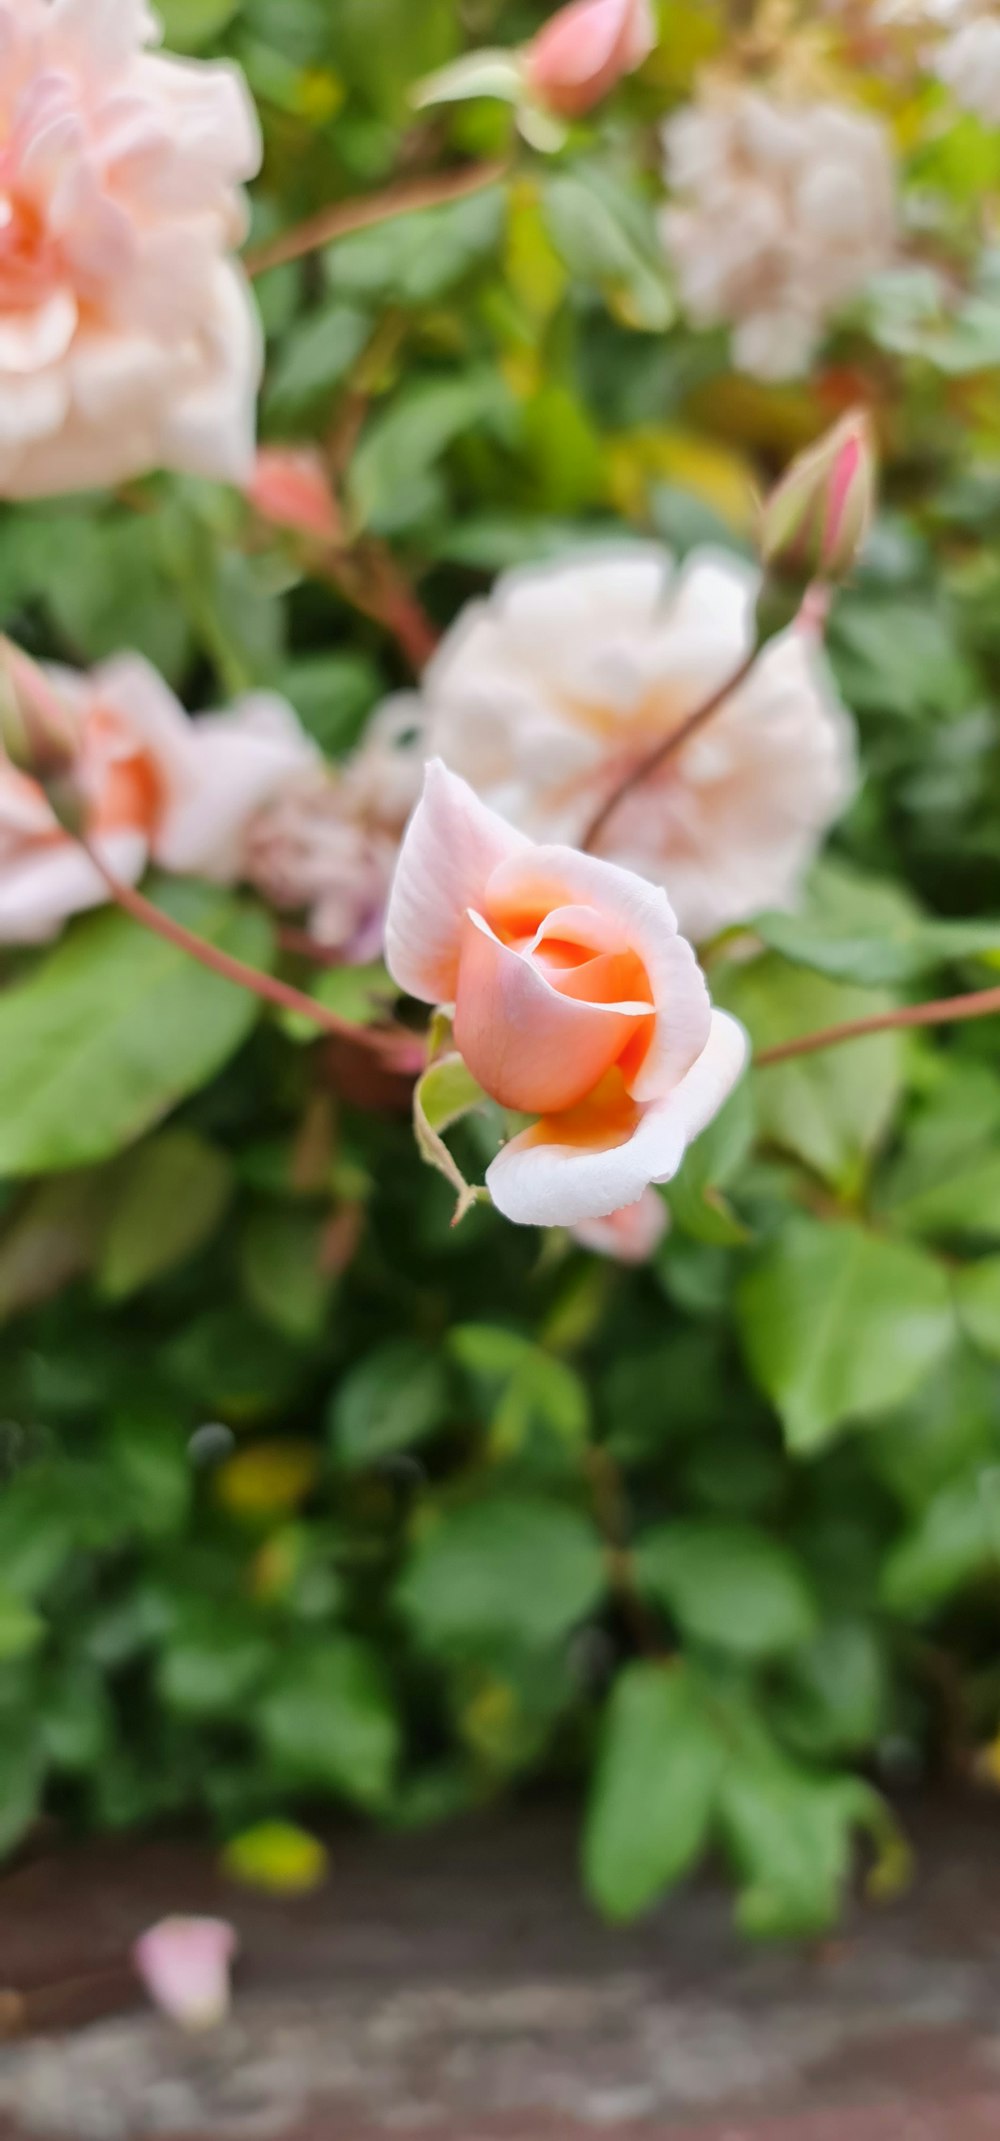 white and pink rose in bloom during daytime